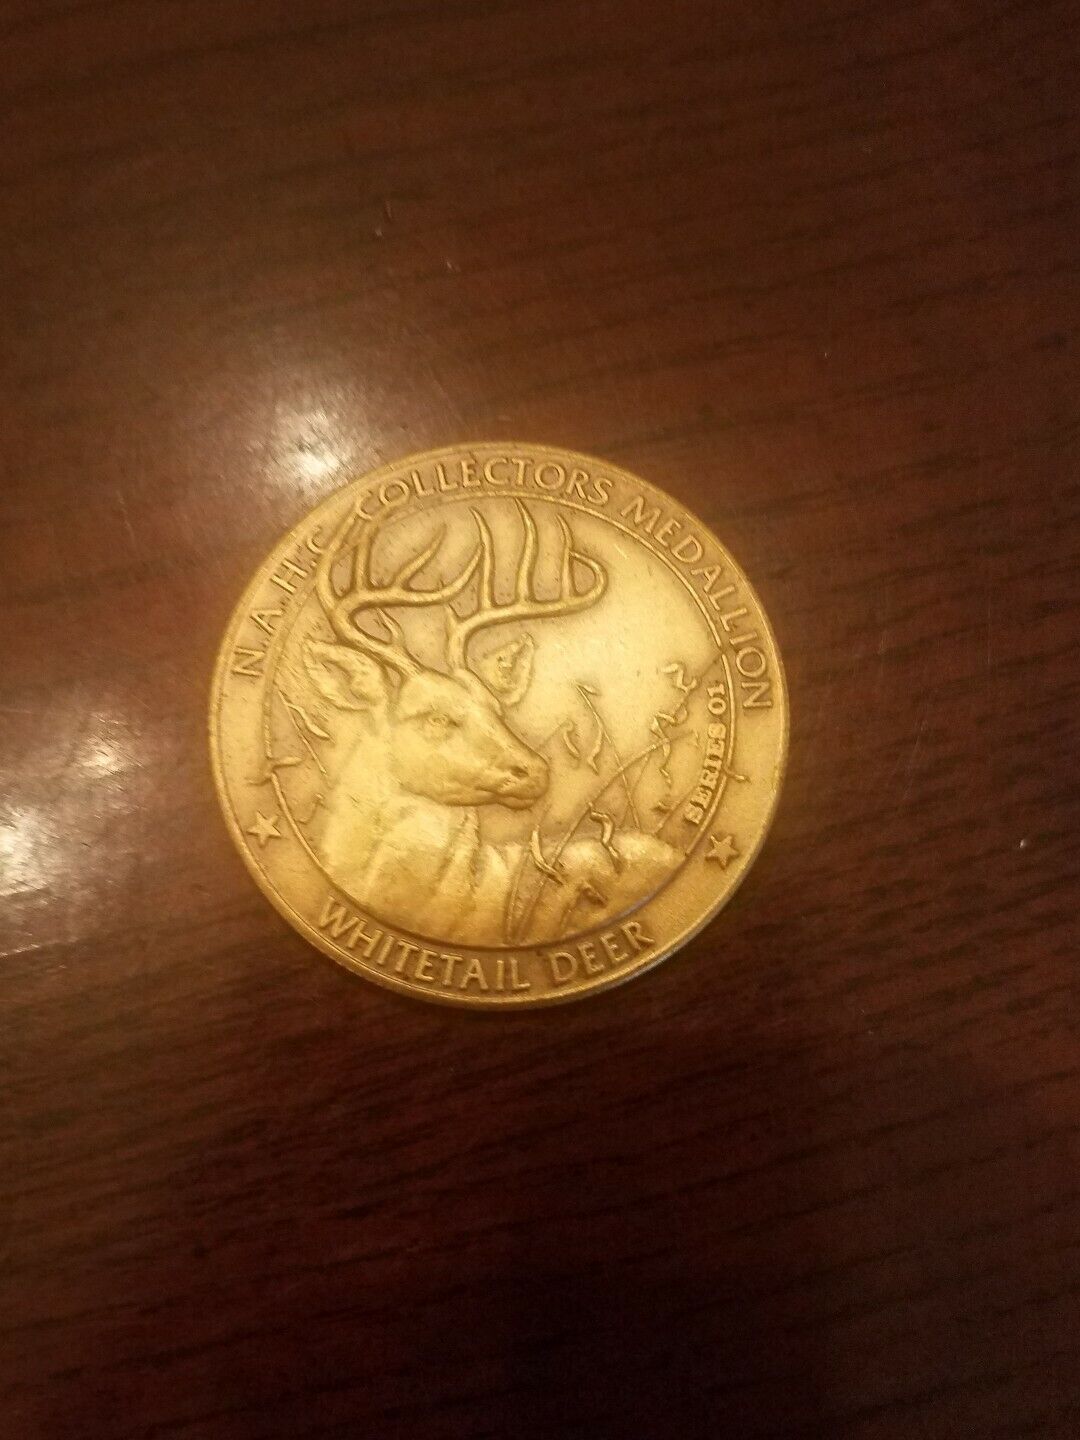 Primary image for N.A.H.C. COLLECTORS MEDALLION SERIES 01 - WHITETAIL DEER